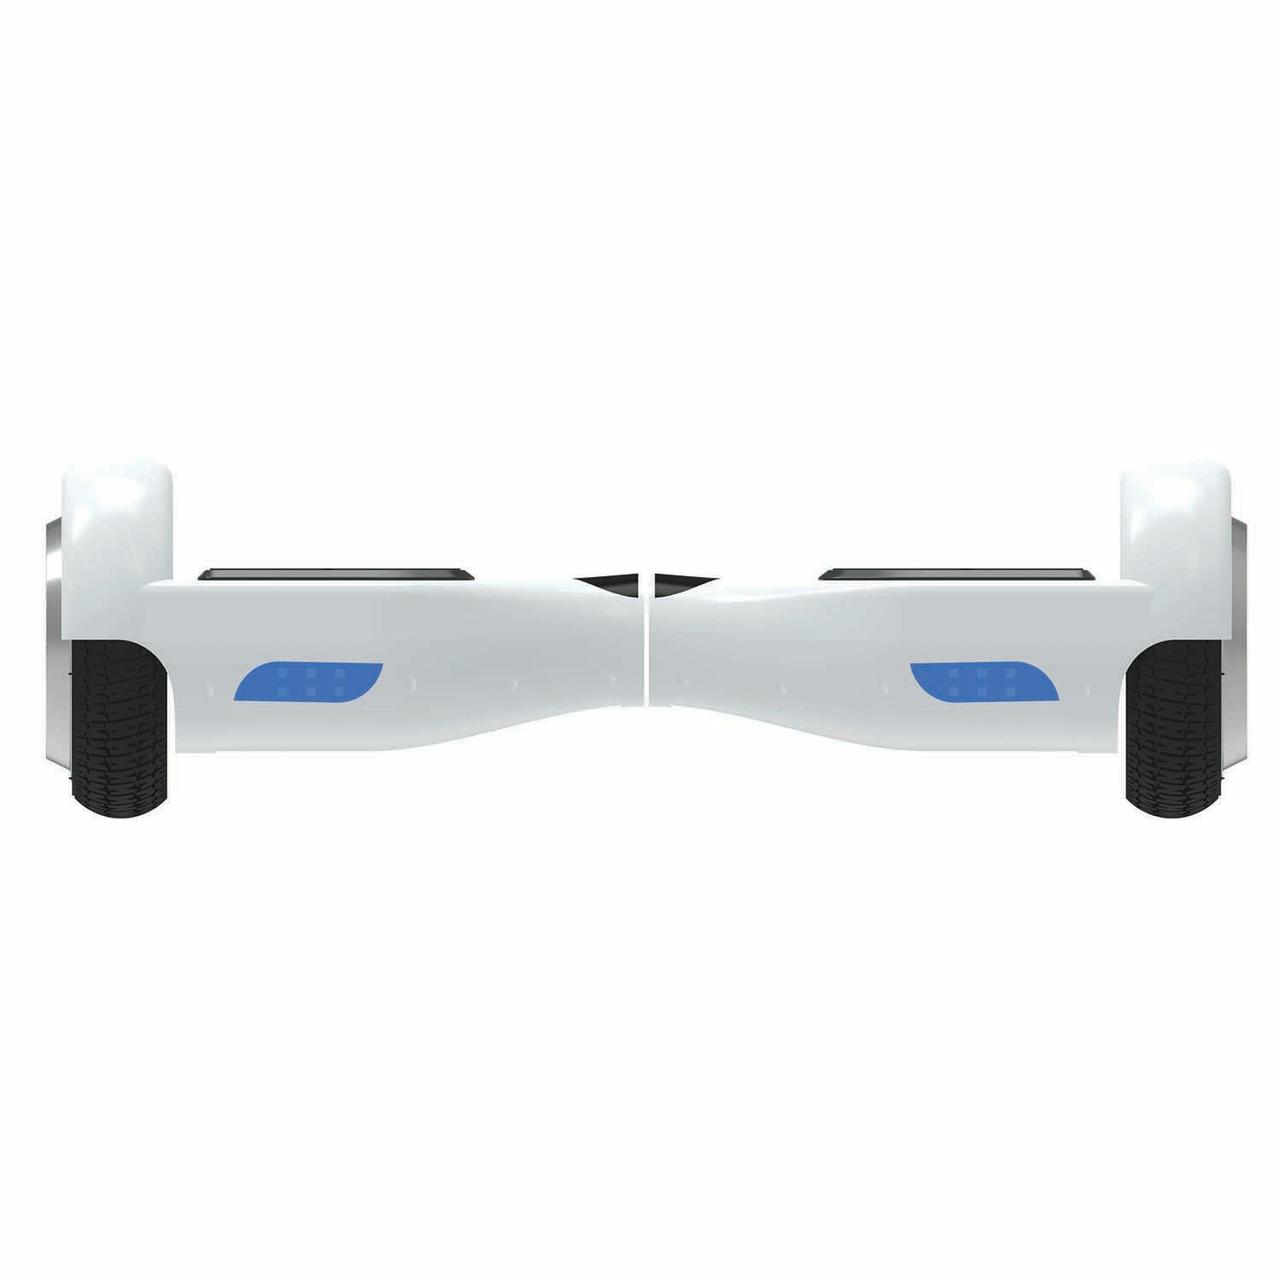 Hover-1 Ultra UL Certified Electric Hoverboard w/ 6.5" Wheels and LED Lights - White - image 2 of 5